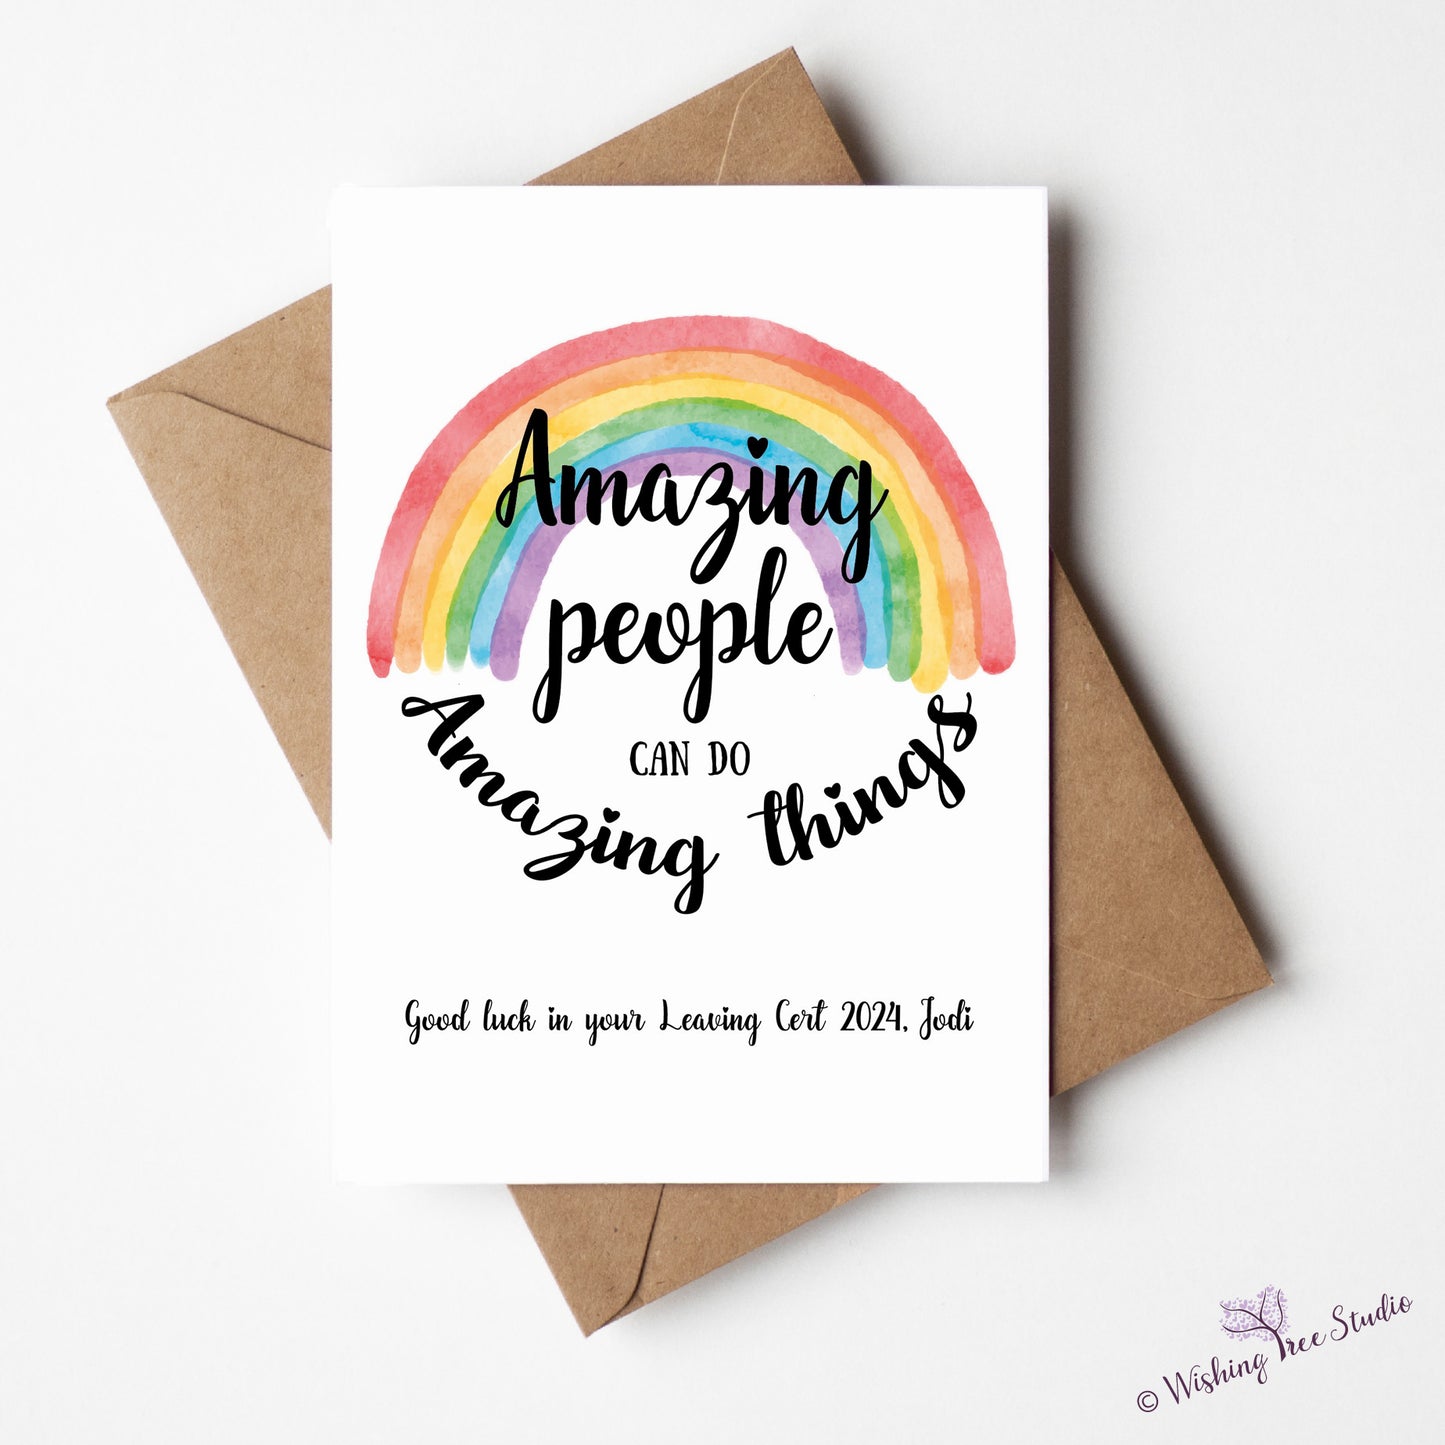 Greeting card - Amazing people can do amazing things (good luck card)